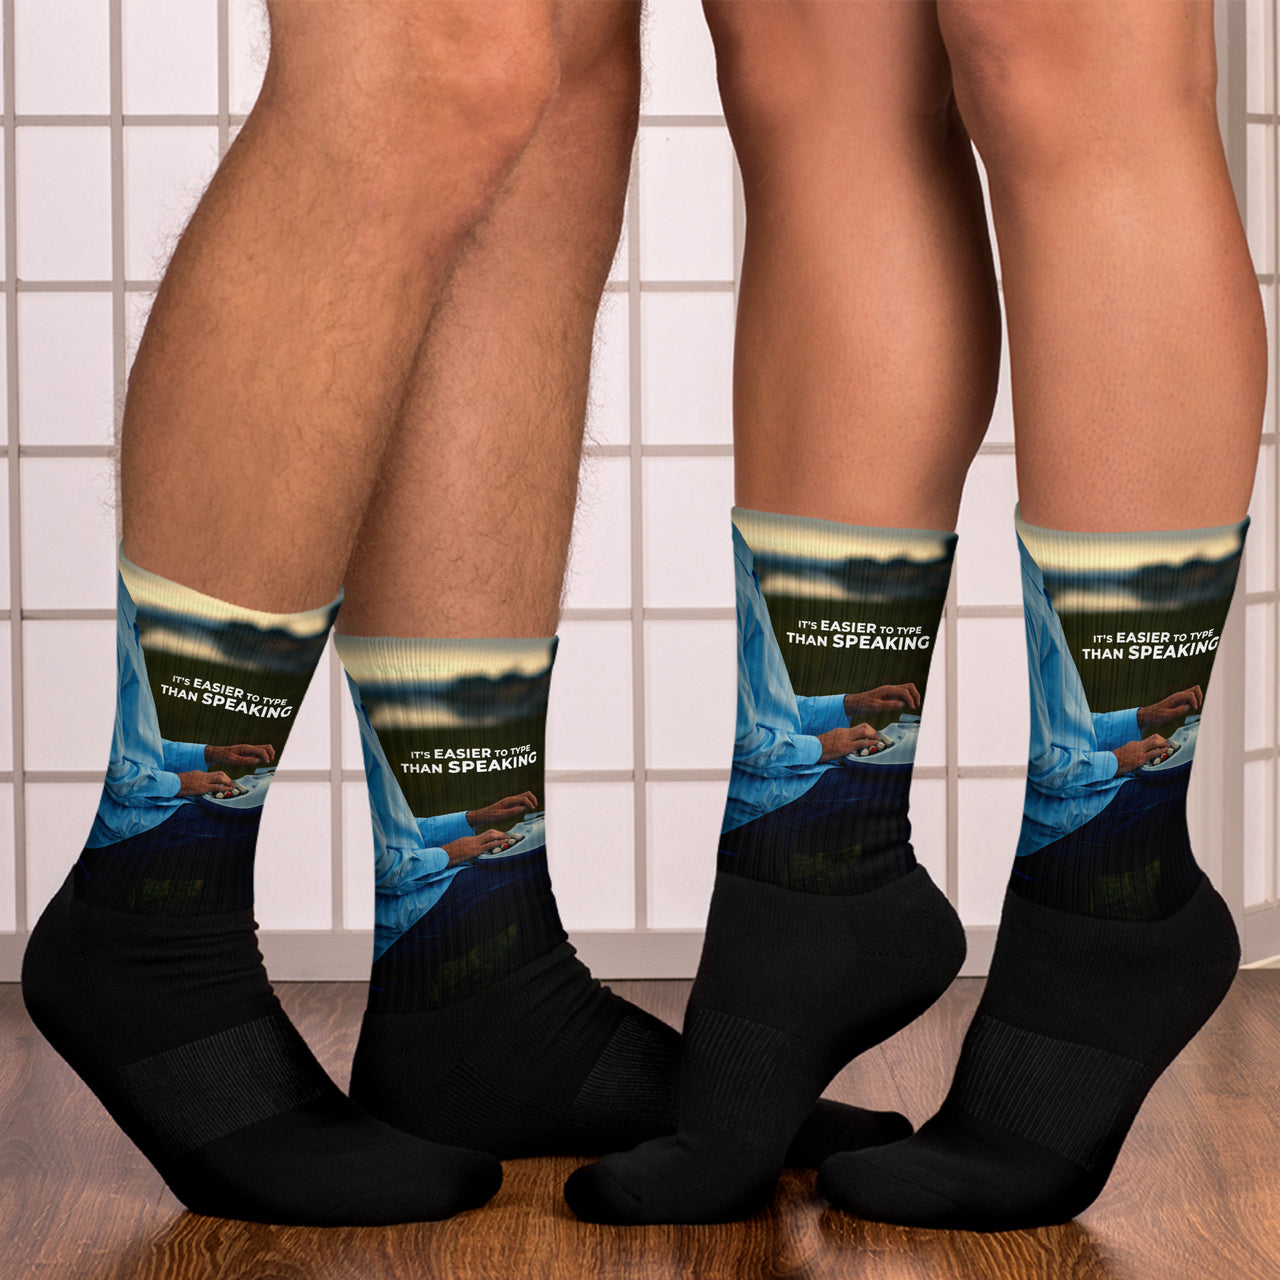 OFFICIAL SOCKS from the poem It's Easier To Type While Speaking